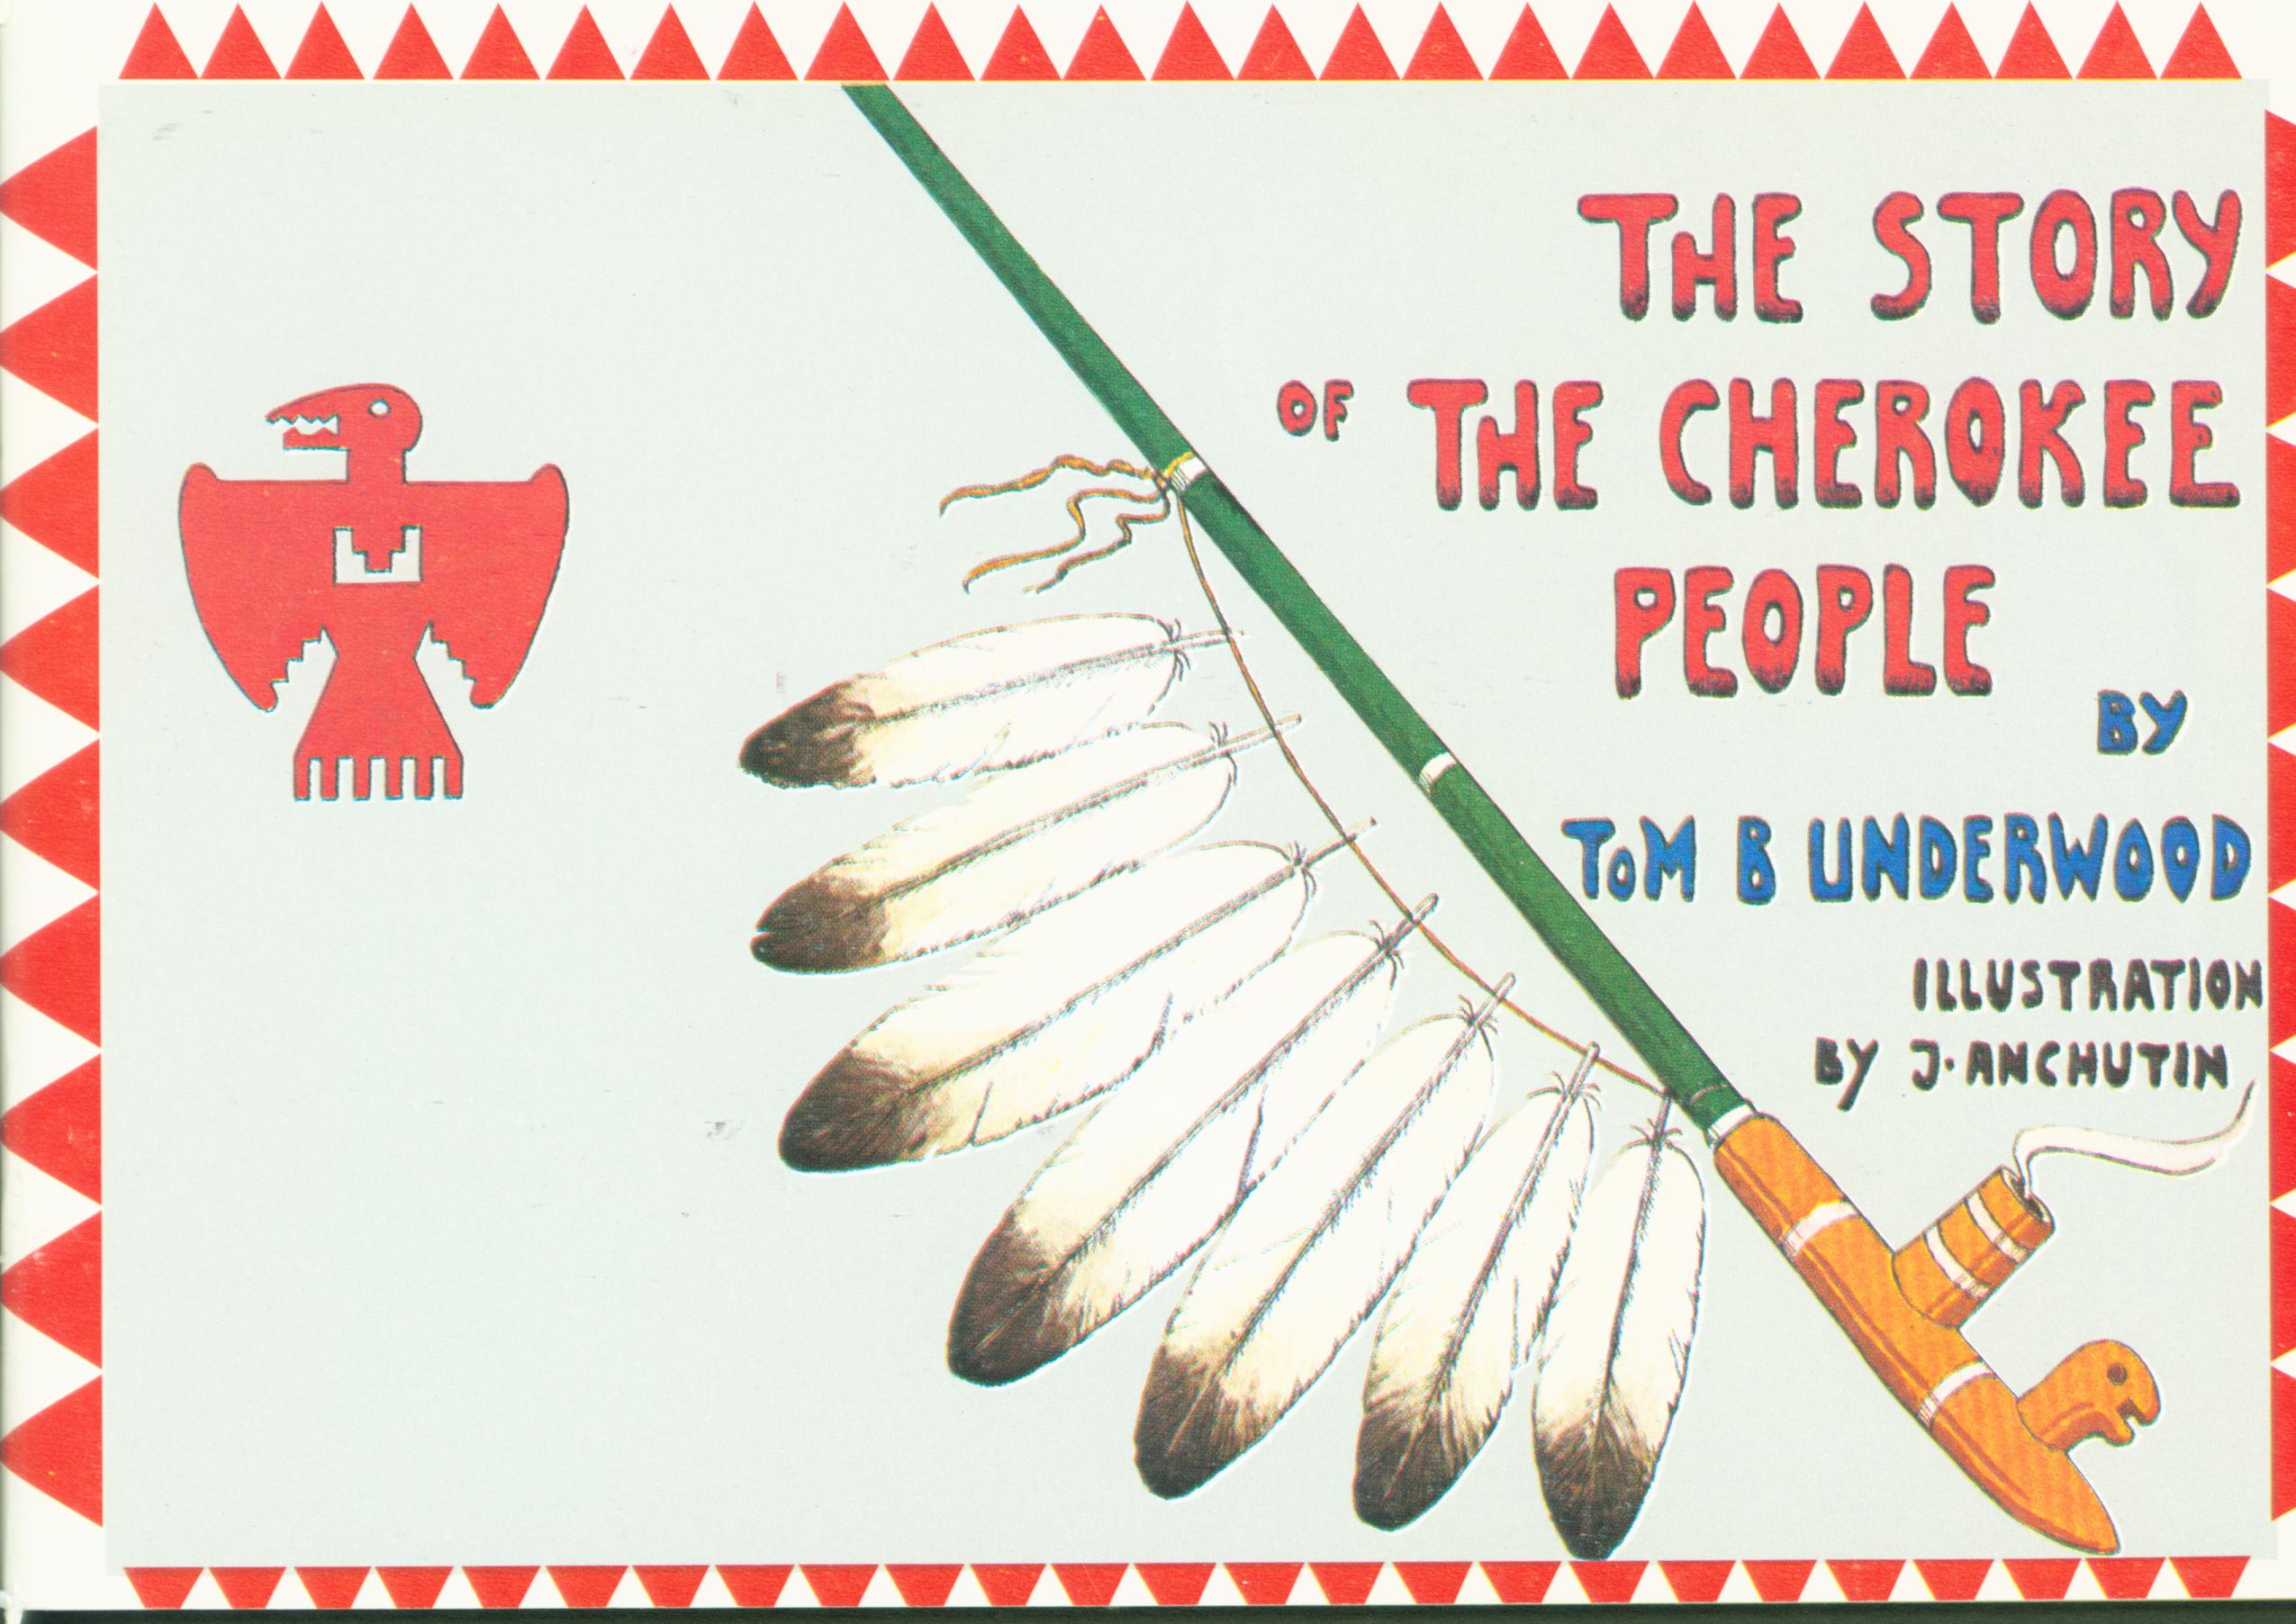 THE STORY OF THE CHEROKEE PEOPLE.